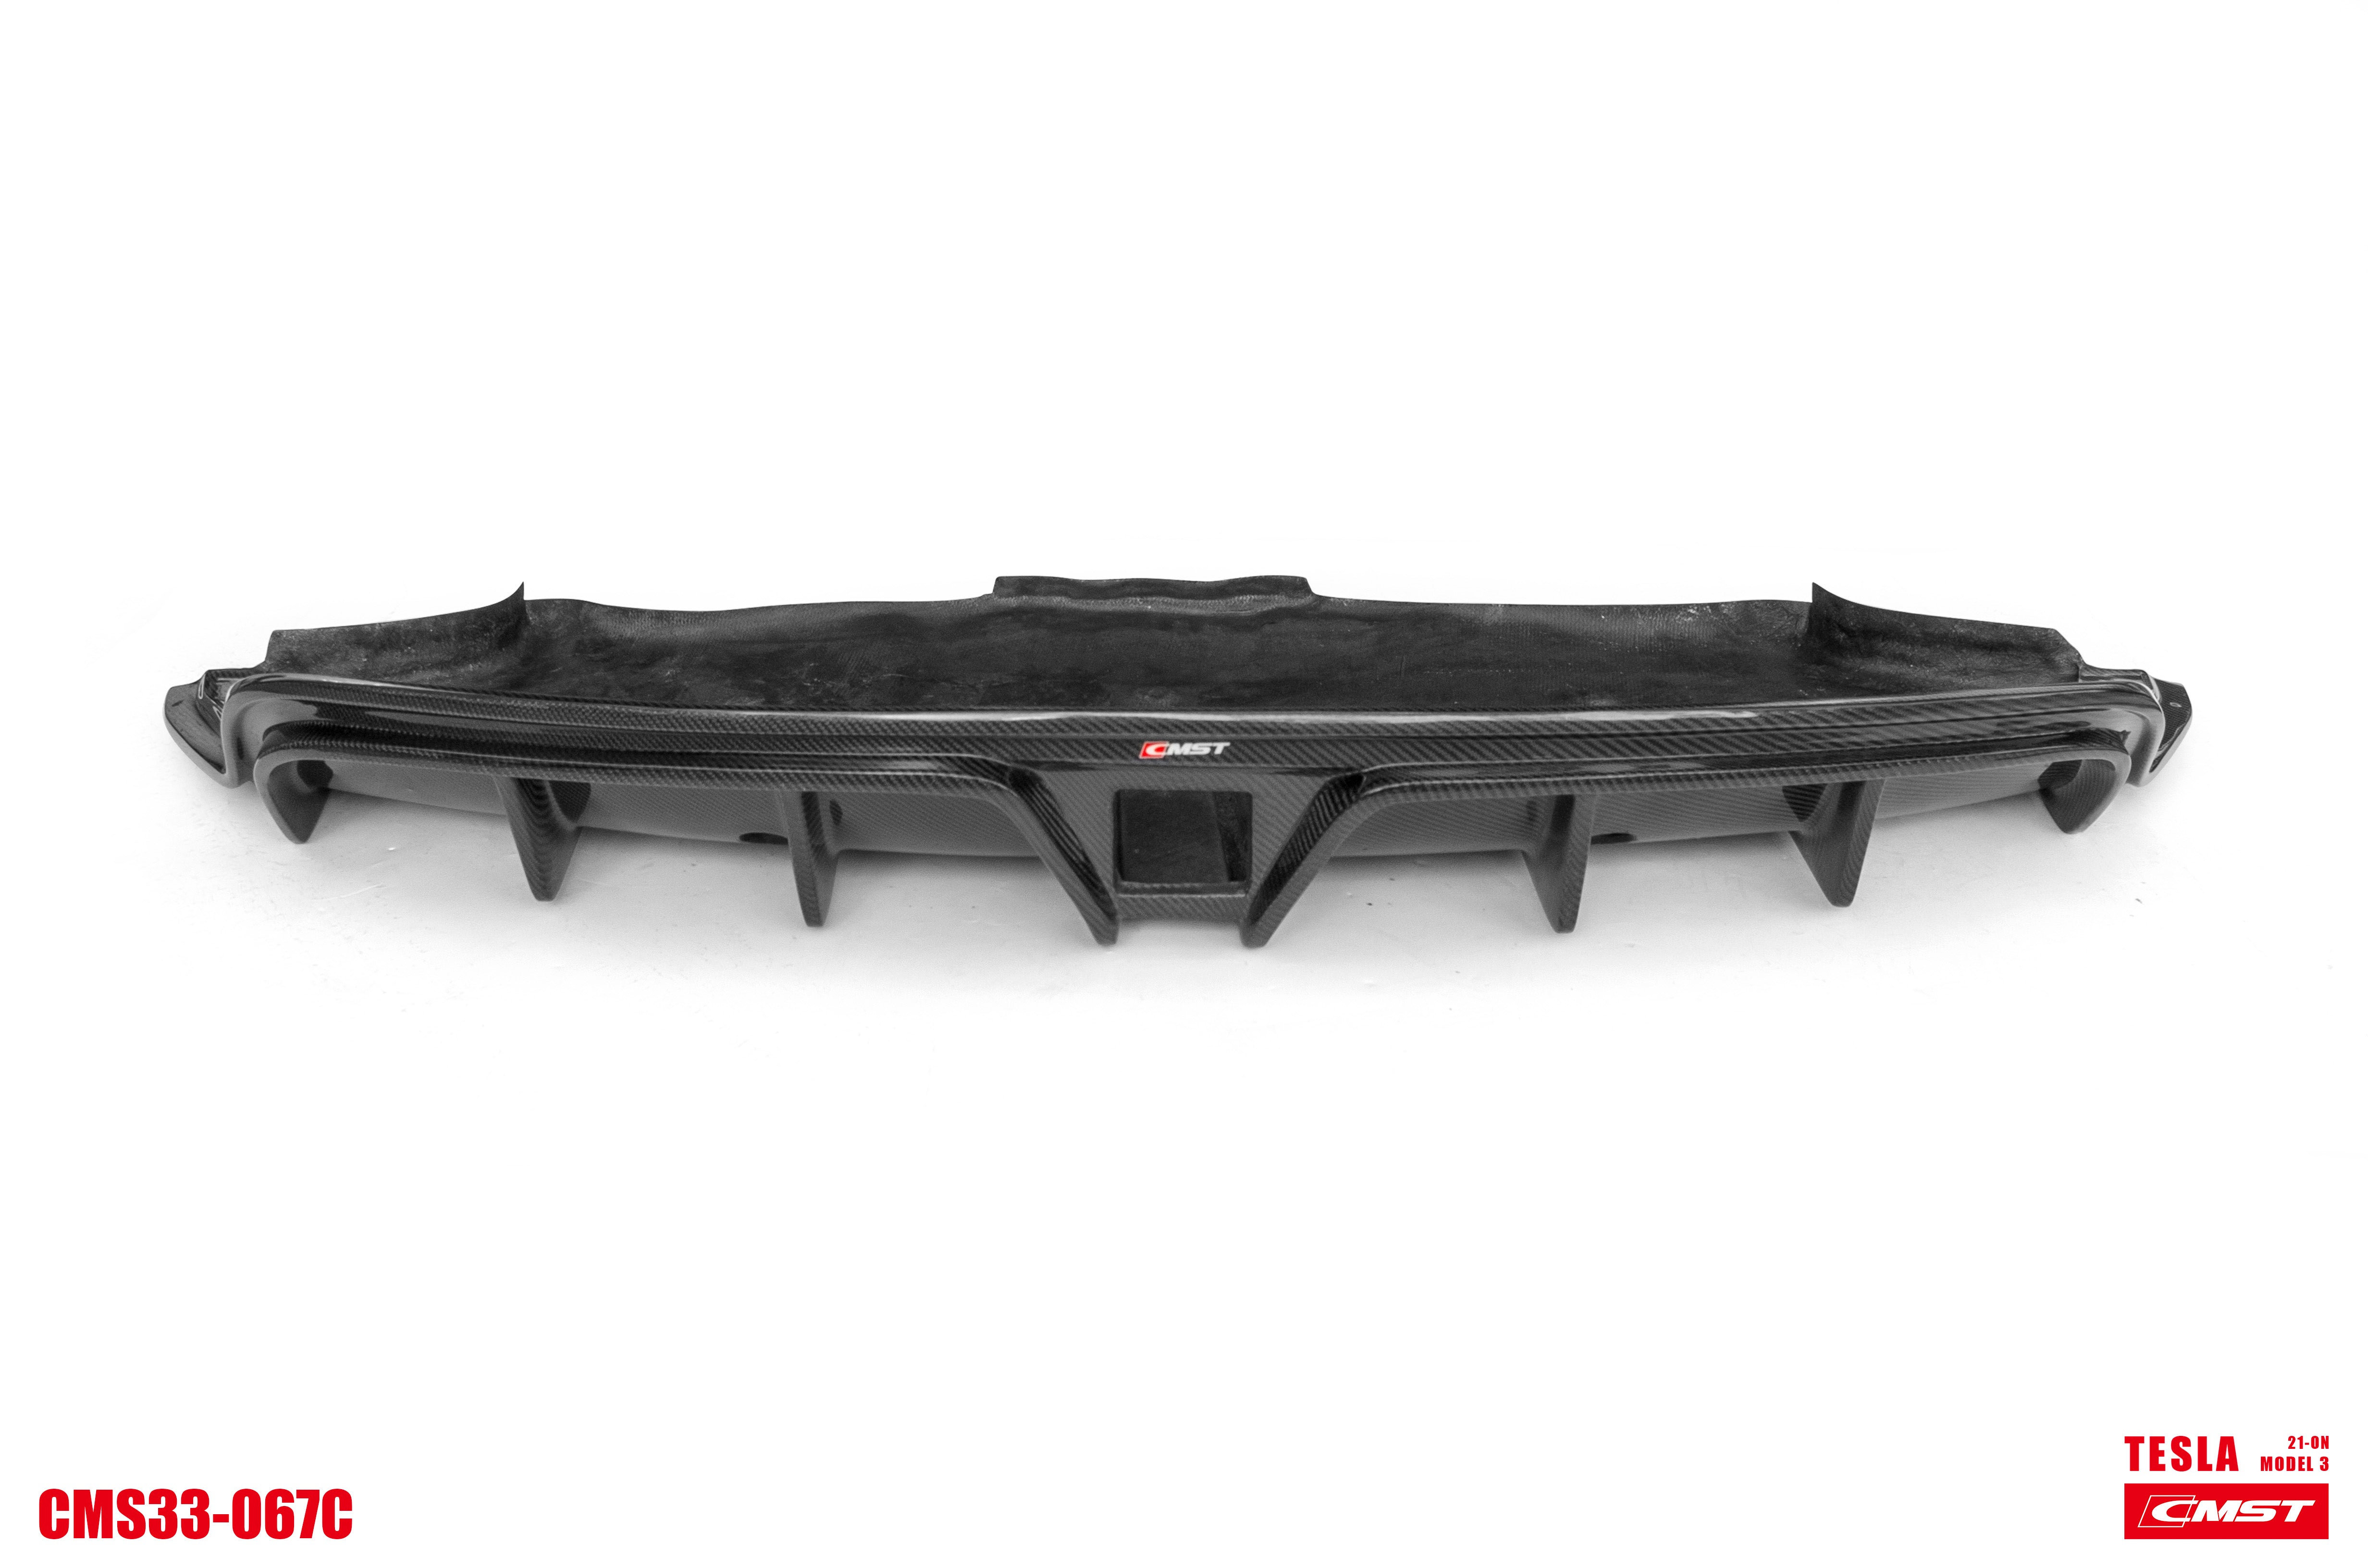 New Release!! CMST Tesla Model 3 Carbon Fiber Rear Diffuser Ver.4 with tow hook access